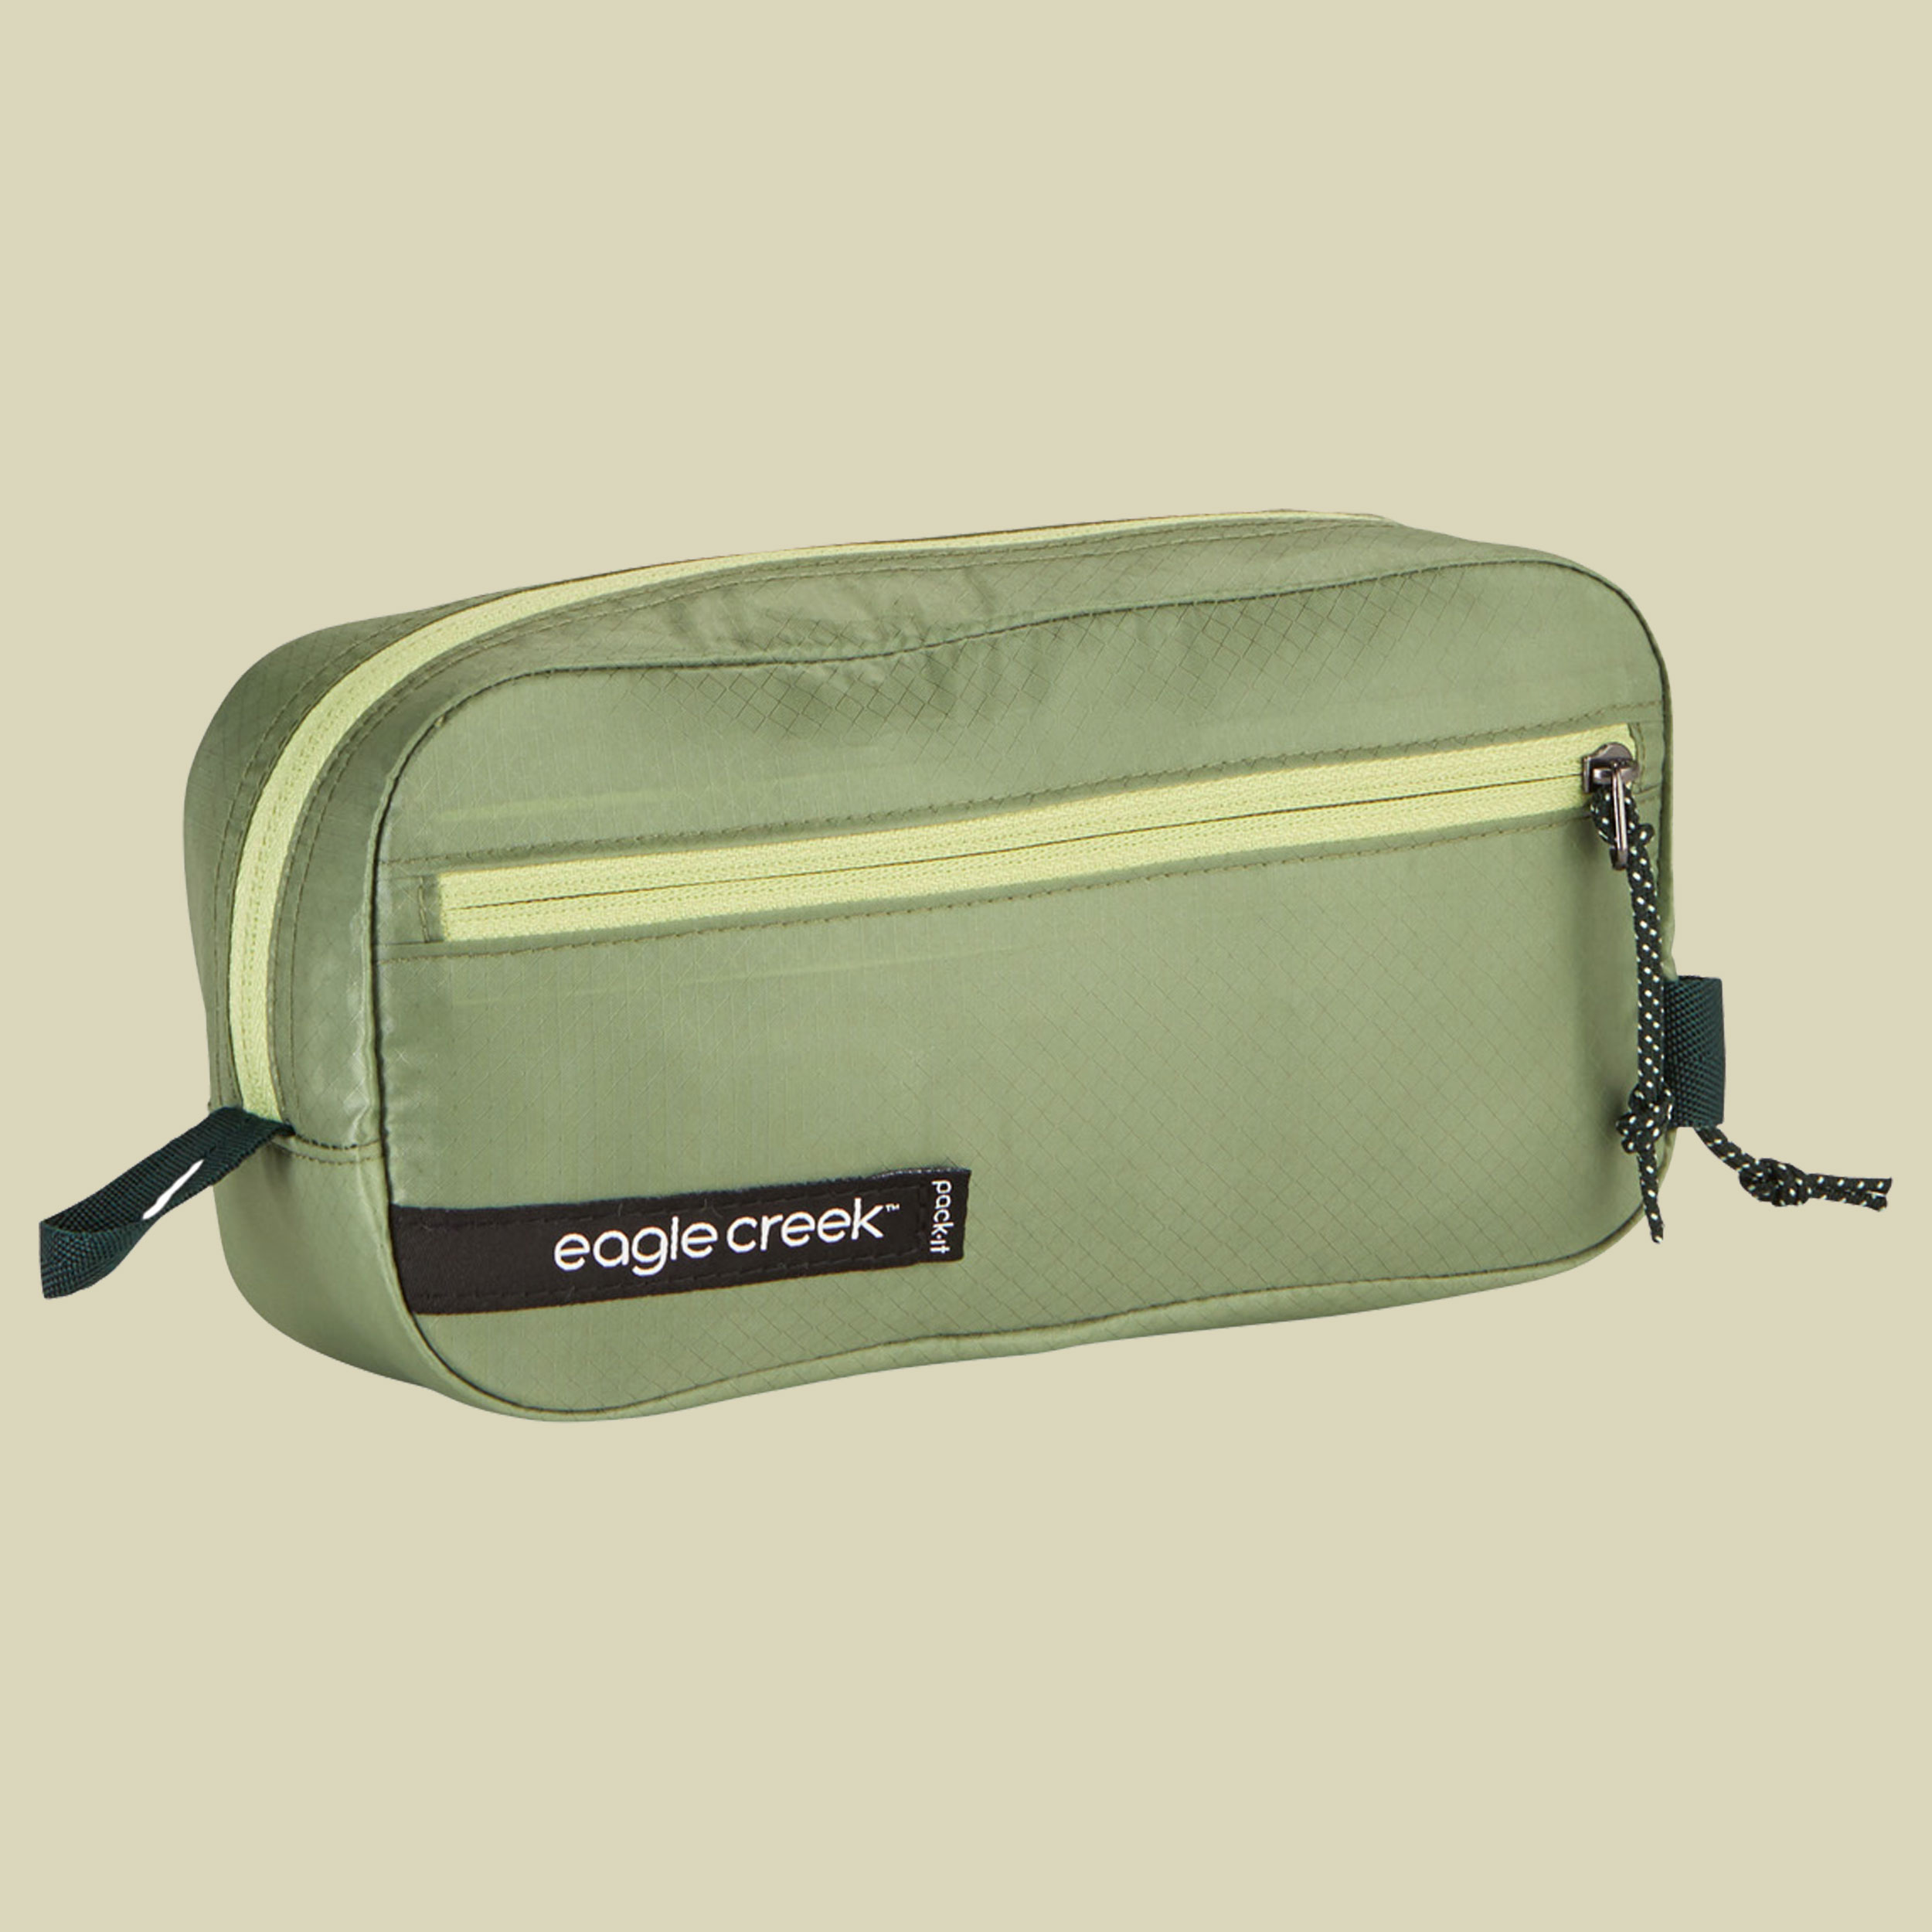 Pack-It Isolate Quick Trip Größe XS Farbe mossy green